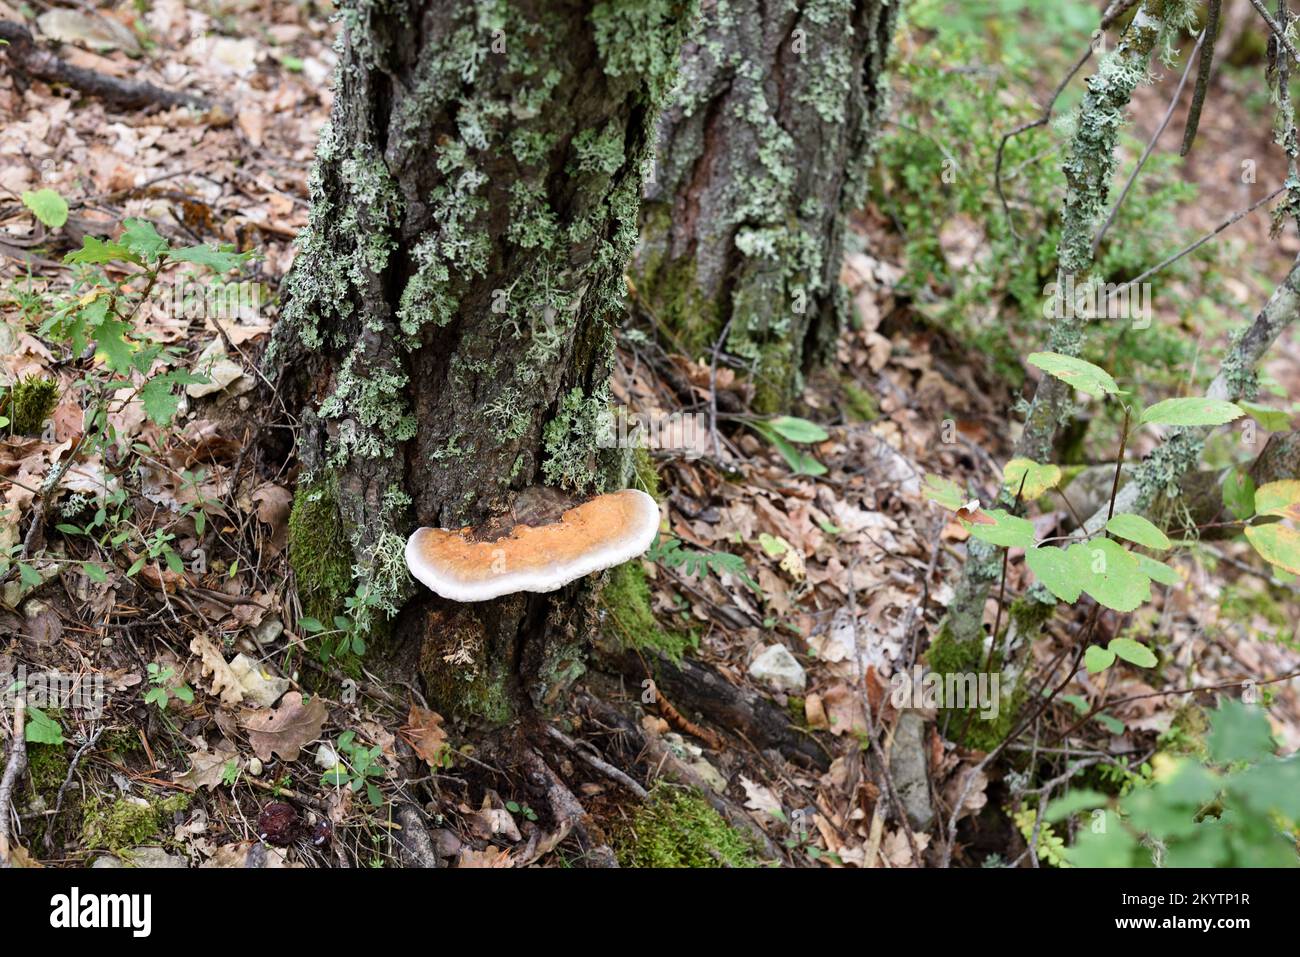 Young Red-Belted Conk or Stem Decay Fungus Fomitopsis pinicola Shelf Fungus or Bracket Fungus or Mushroom Stock Photo